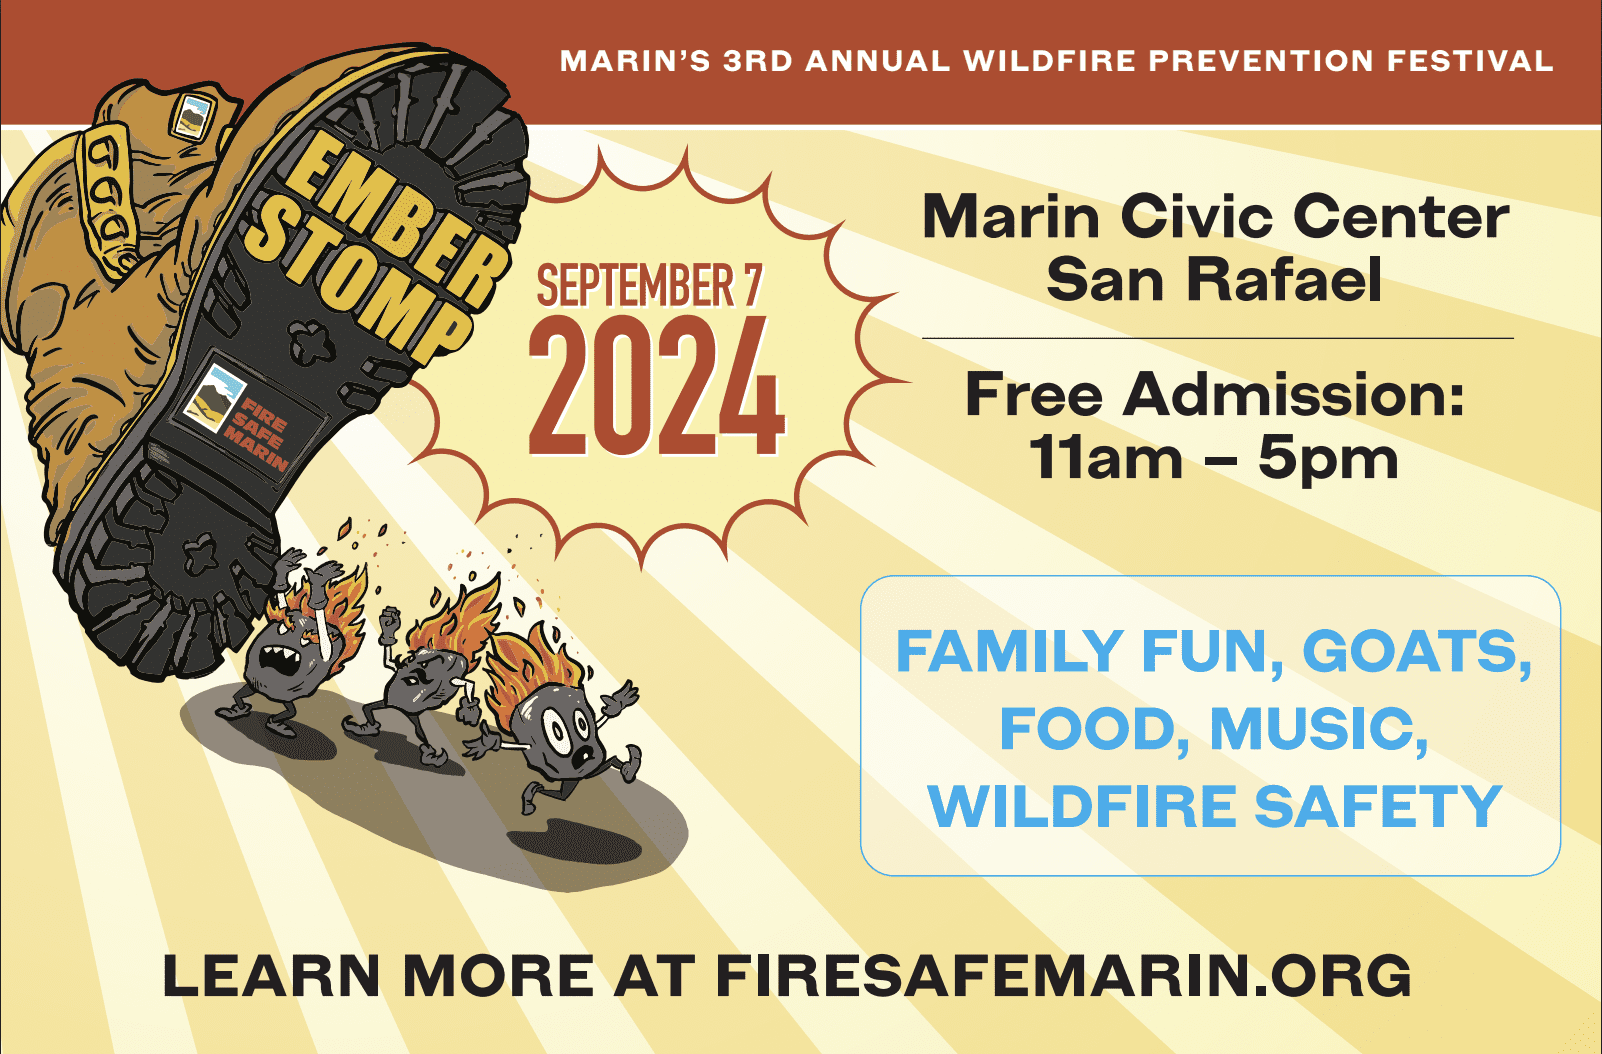 Text "Ember Stomp September 7, 2024" and "Marin Civic Center, Free Admission, 11am to 5pm"